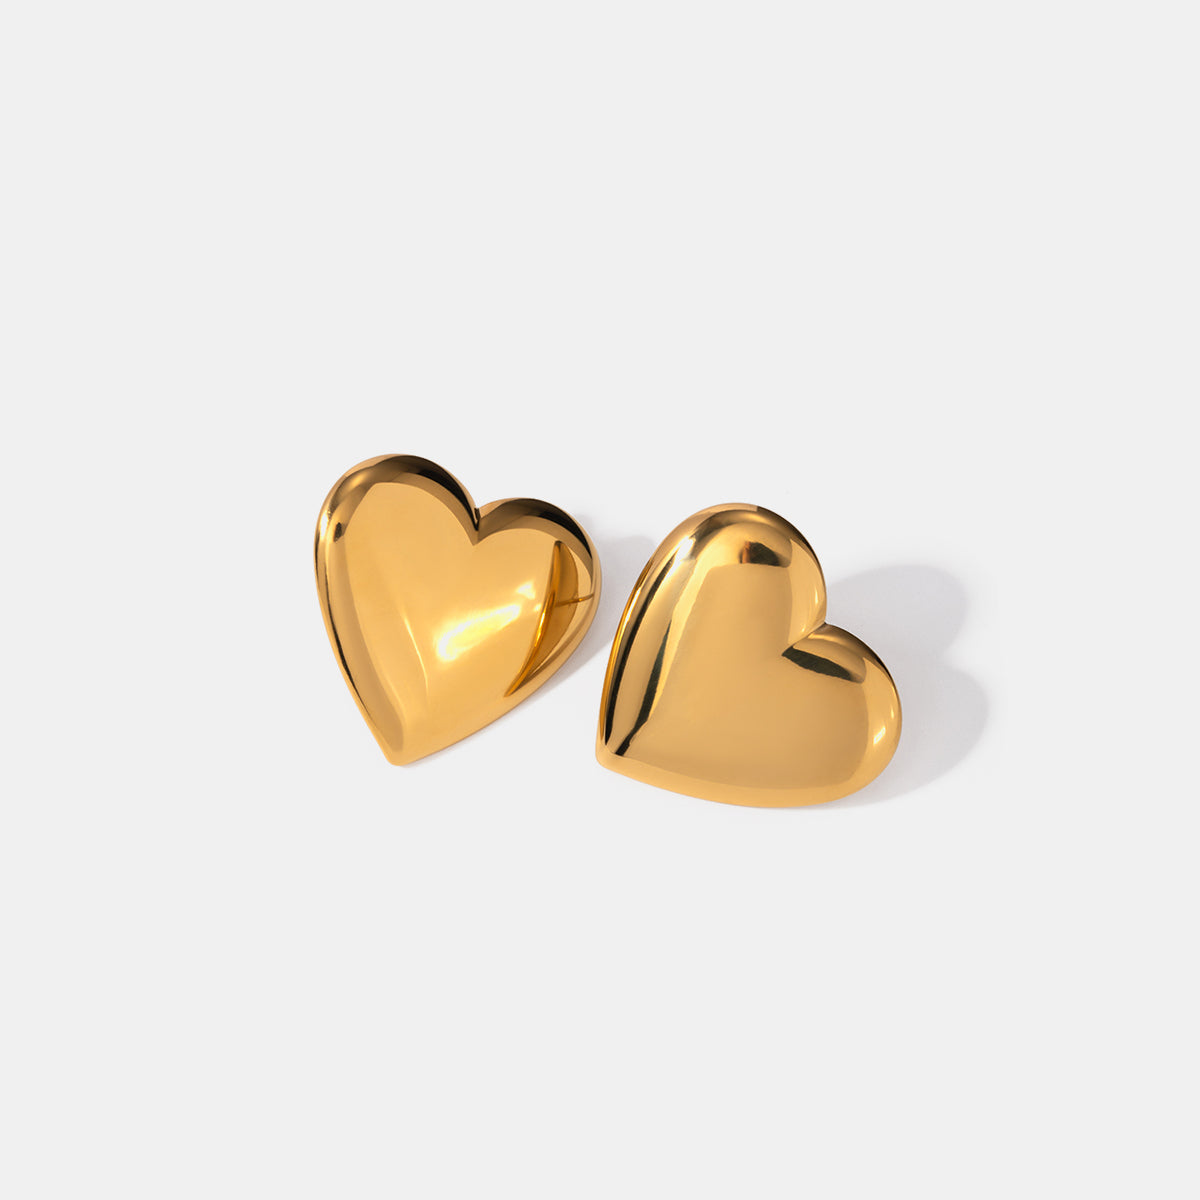 1# BEST Gold Heart Stud Earrings Jewelry Gift for Women | #1 Best Most Top Trendy Trending Aesthetic Yellow Gold Earrings Jewelry Gift for Women, Girls, Girlfriend, Mother, Wife, Ladies | Mason & Madison Co.